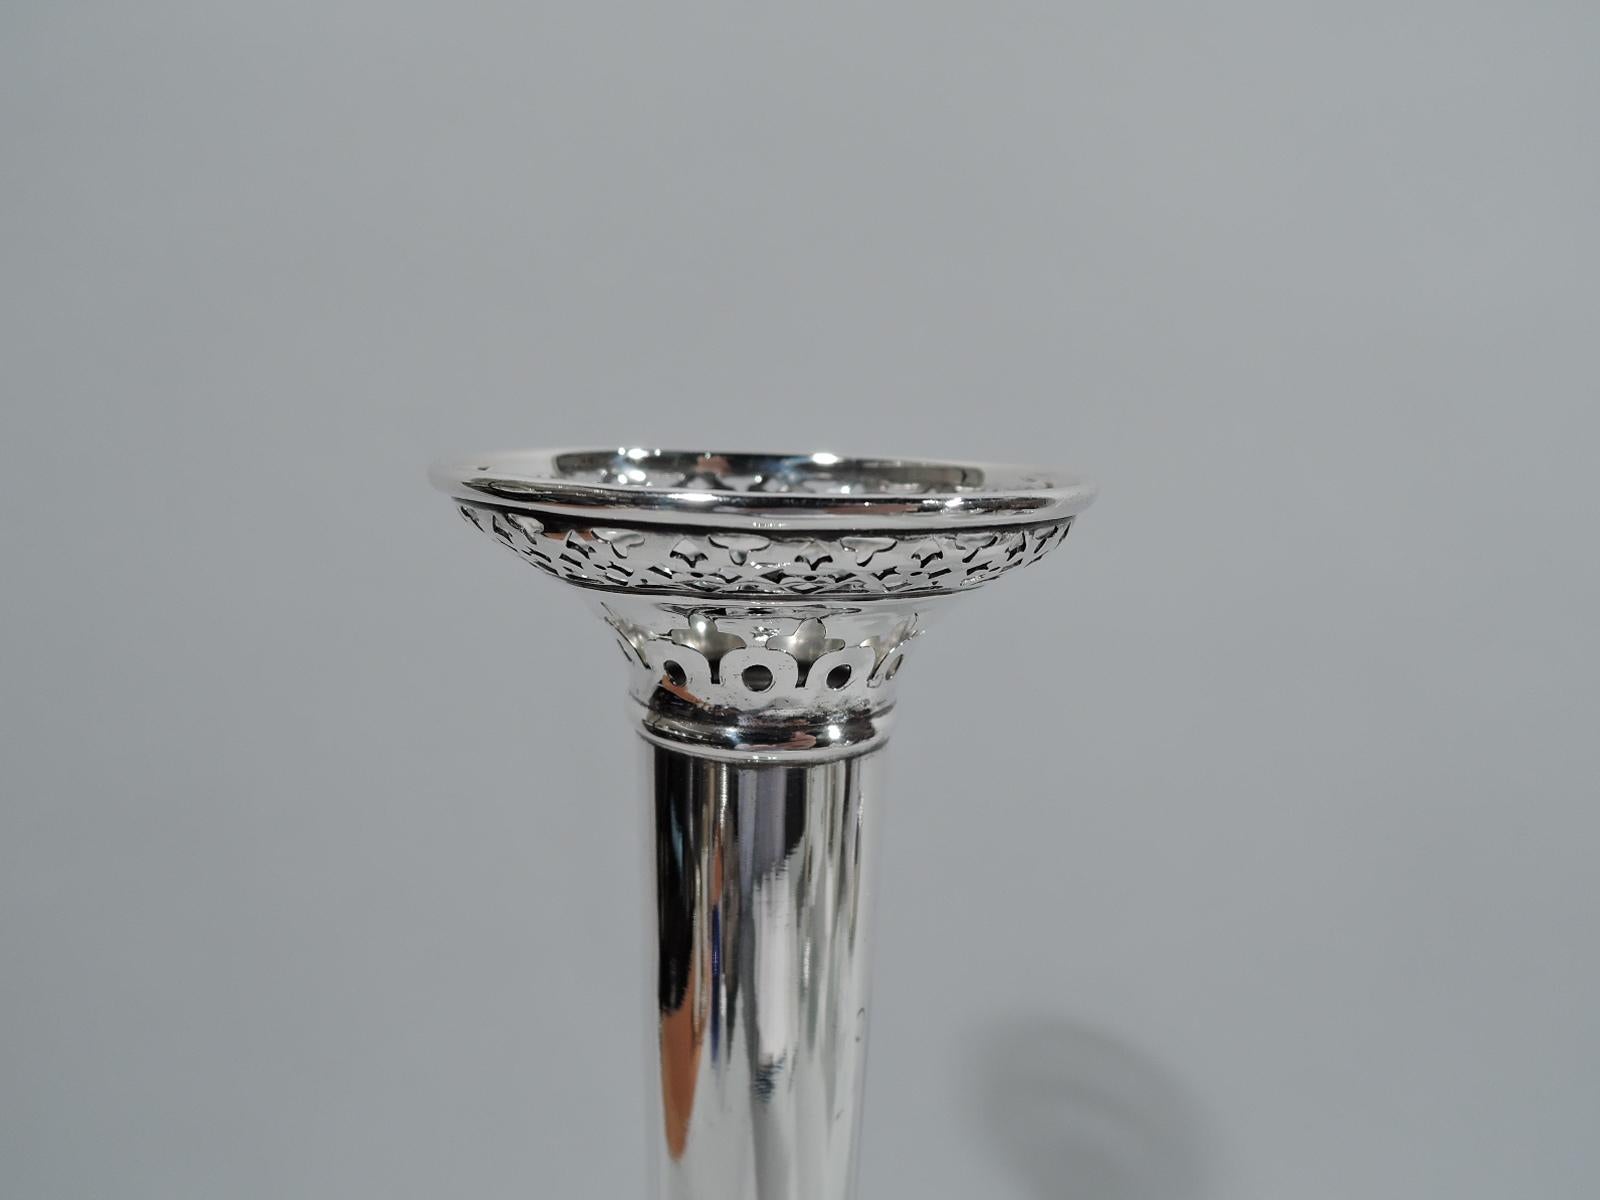 Tall and chic sterling silver bud vase. Made by La Pierre (part of International) in Newark, ca 1910. Narrow and elongated cone on raised foot; mouth curved with ornamental piercing. Fully marked including maker’s stamp and no. 825. Weighted.